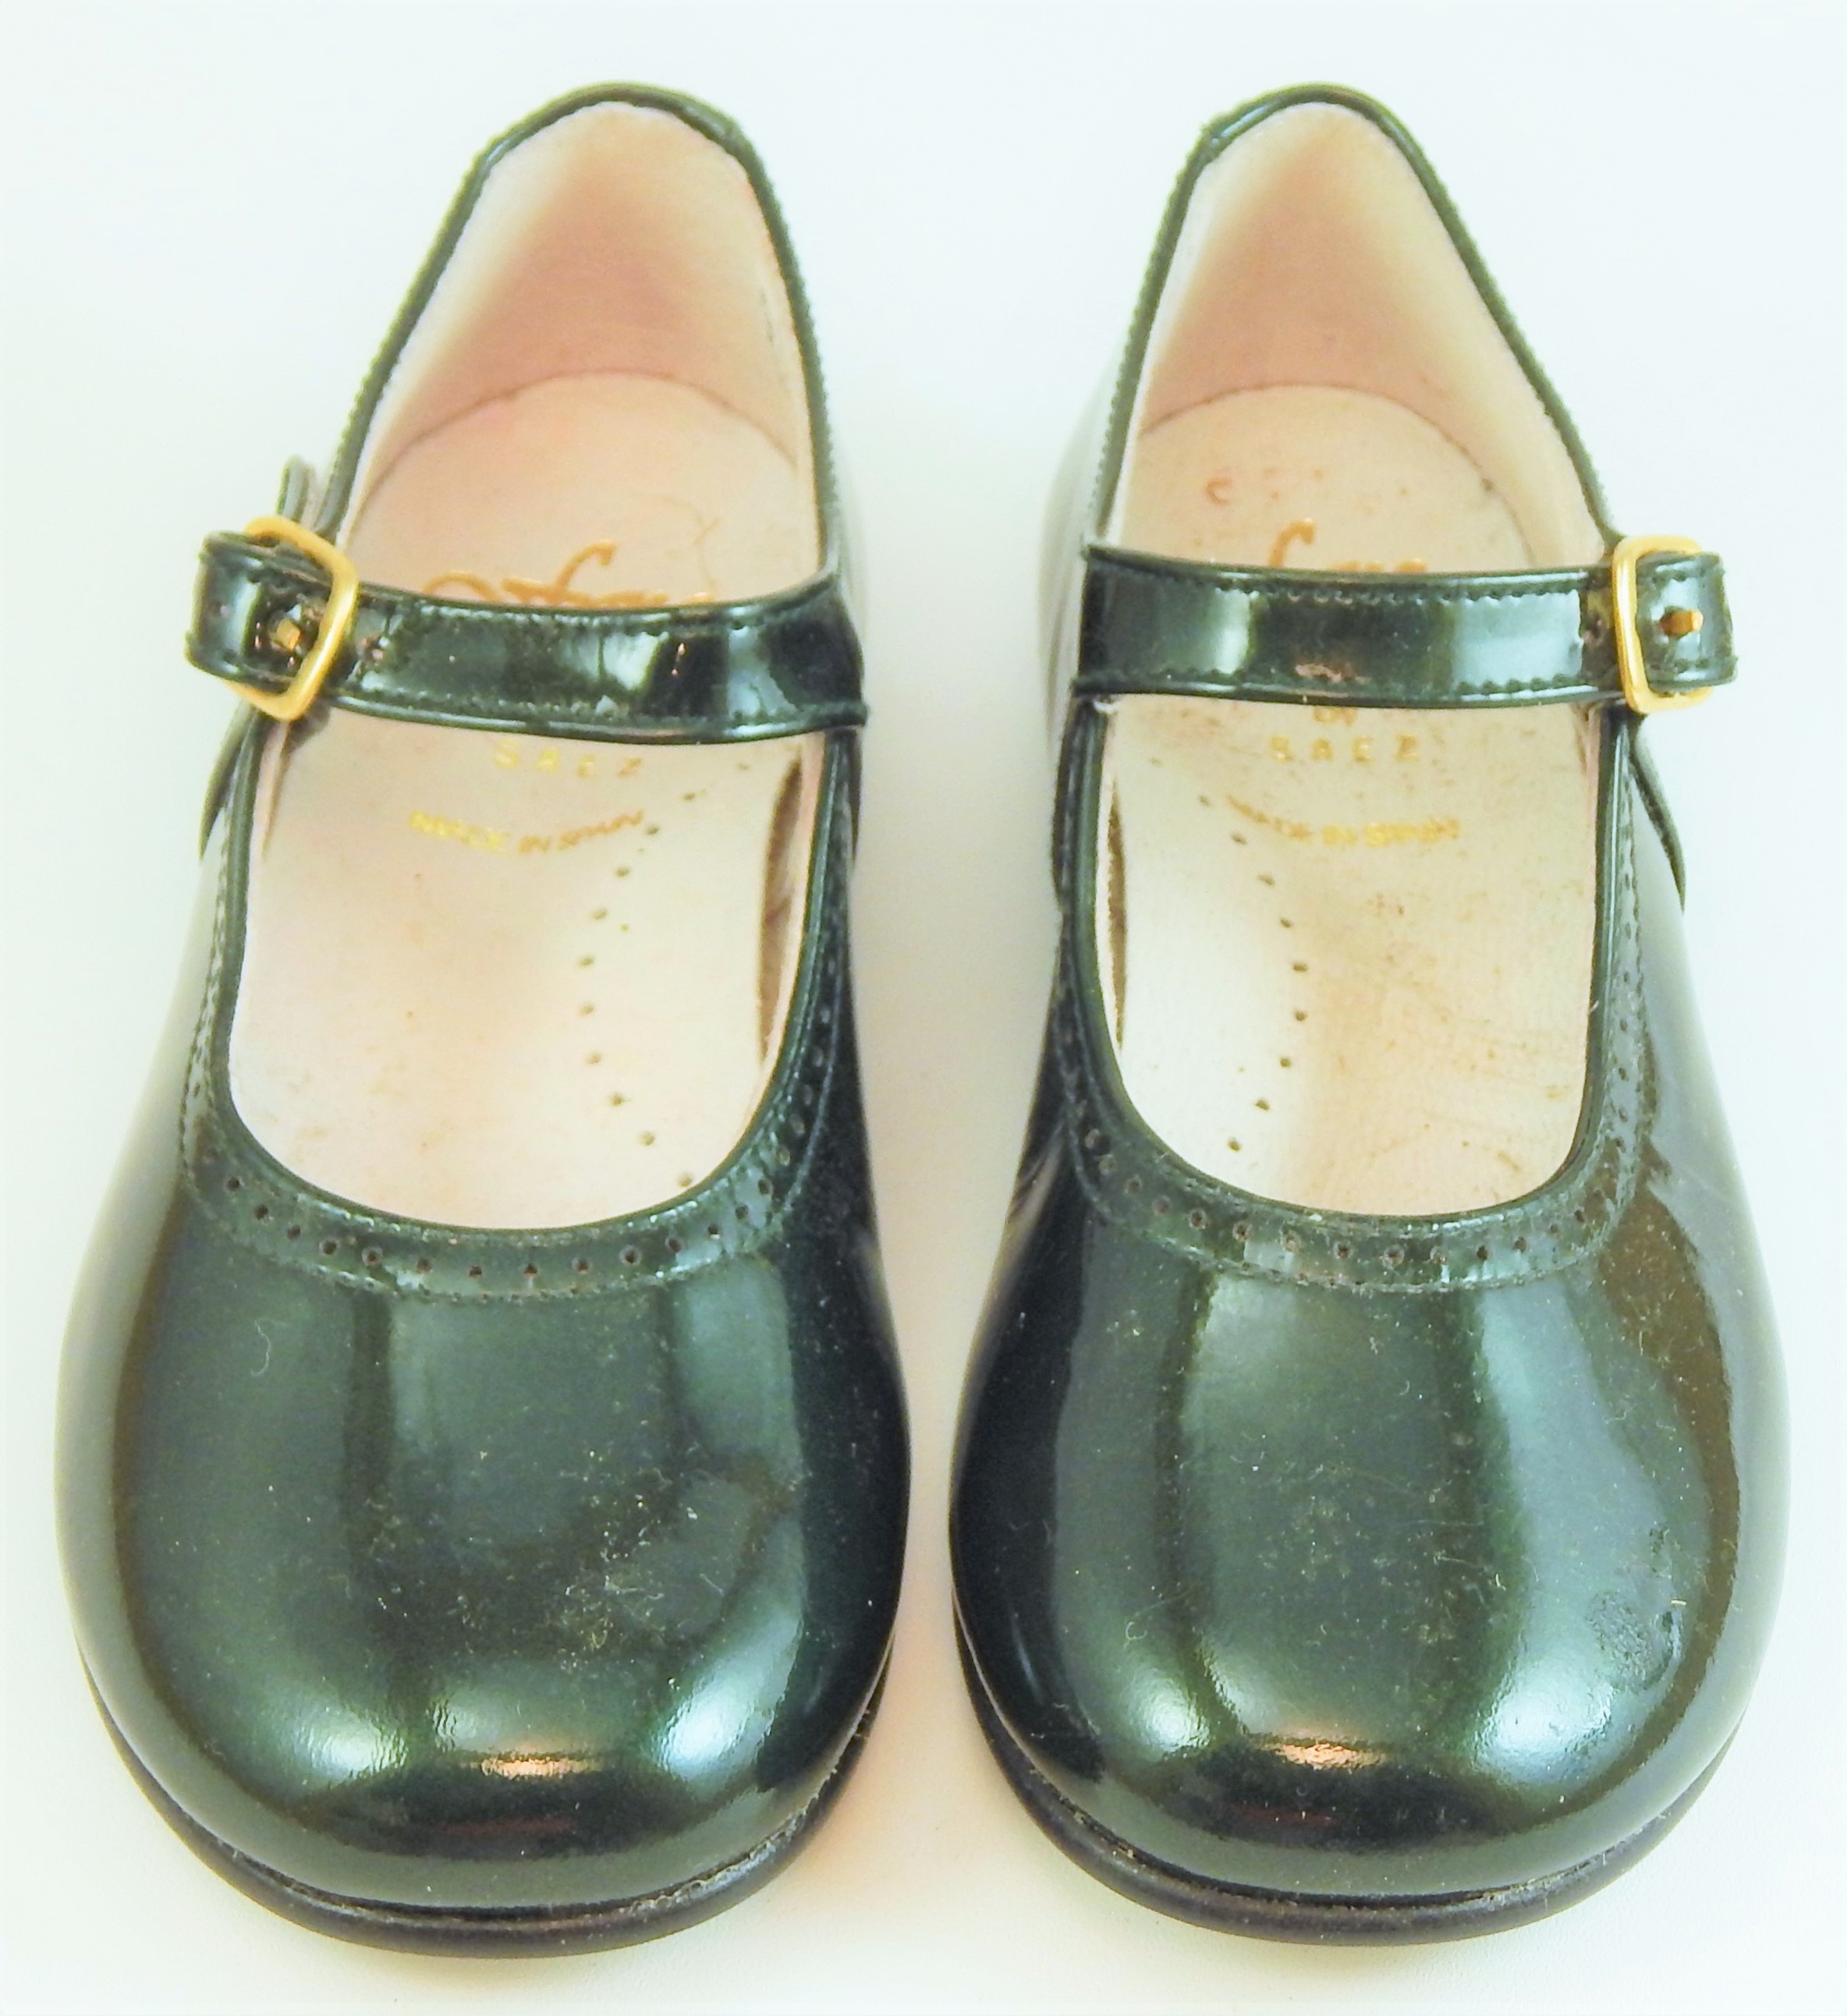 Faro F-4047 - Forest Green Patent Mary Janes - Euro 25 Size 8